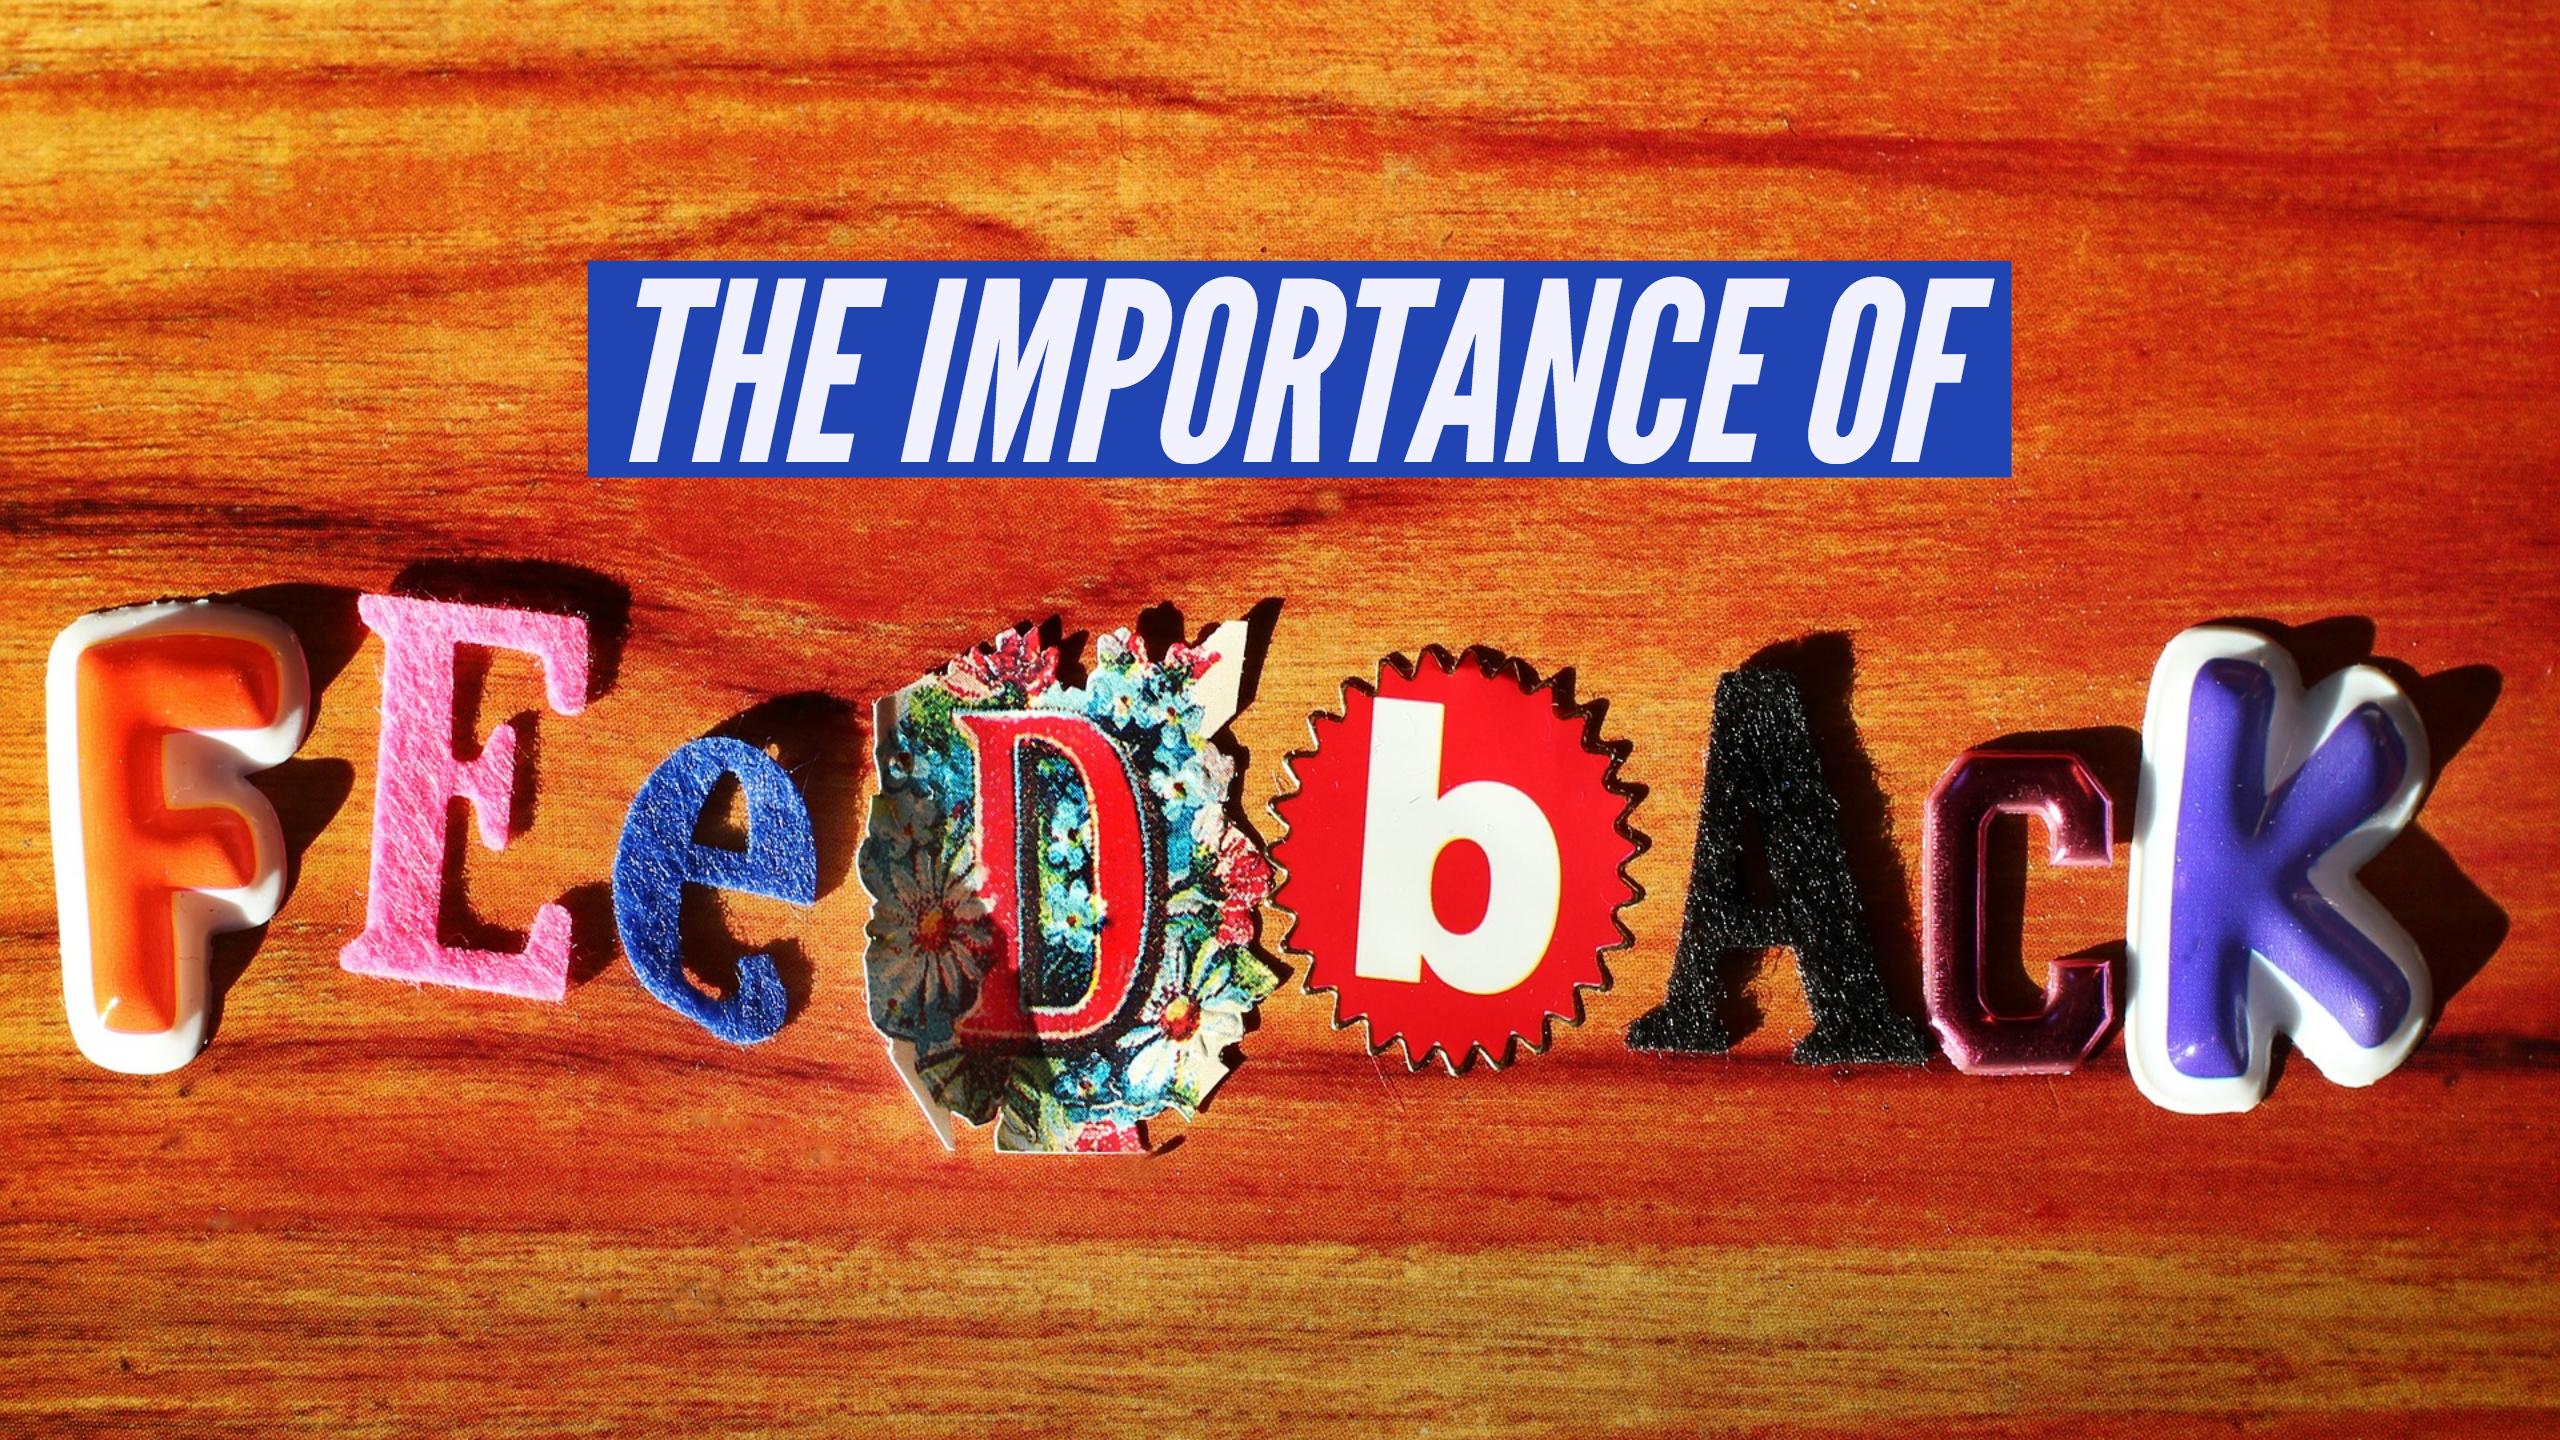 The importance of feedback in formative assessment